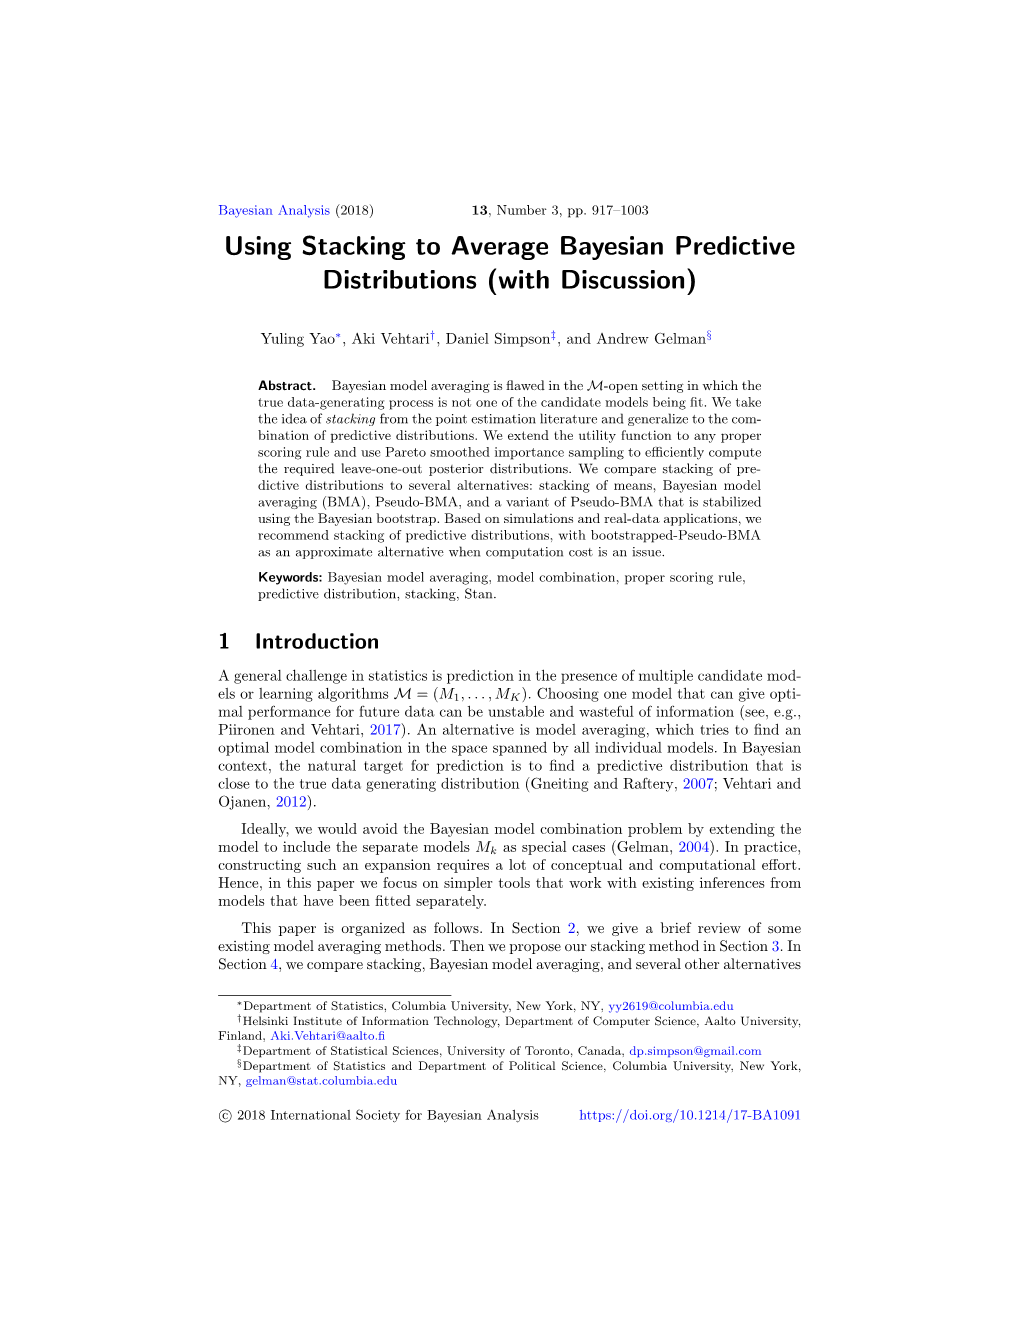 Using Stacking to Average Bayesian Predictive Distributions (With Discussion)